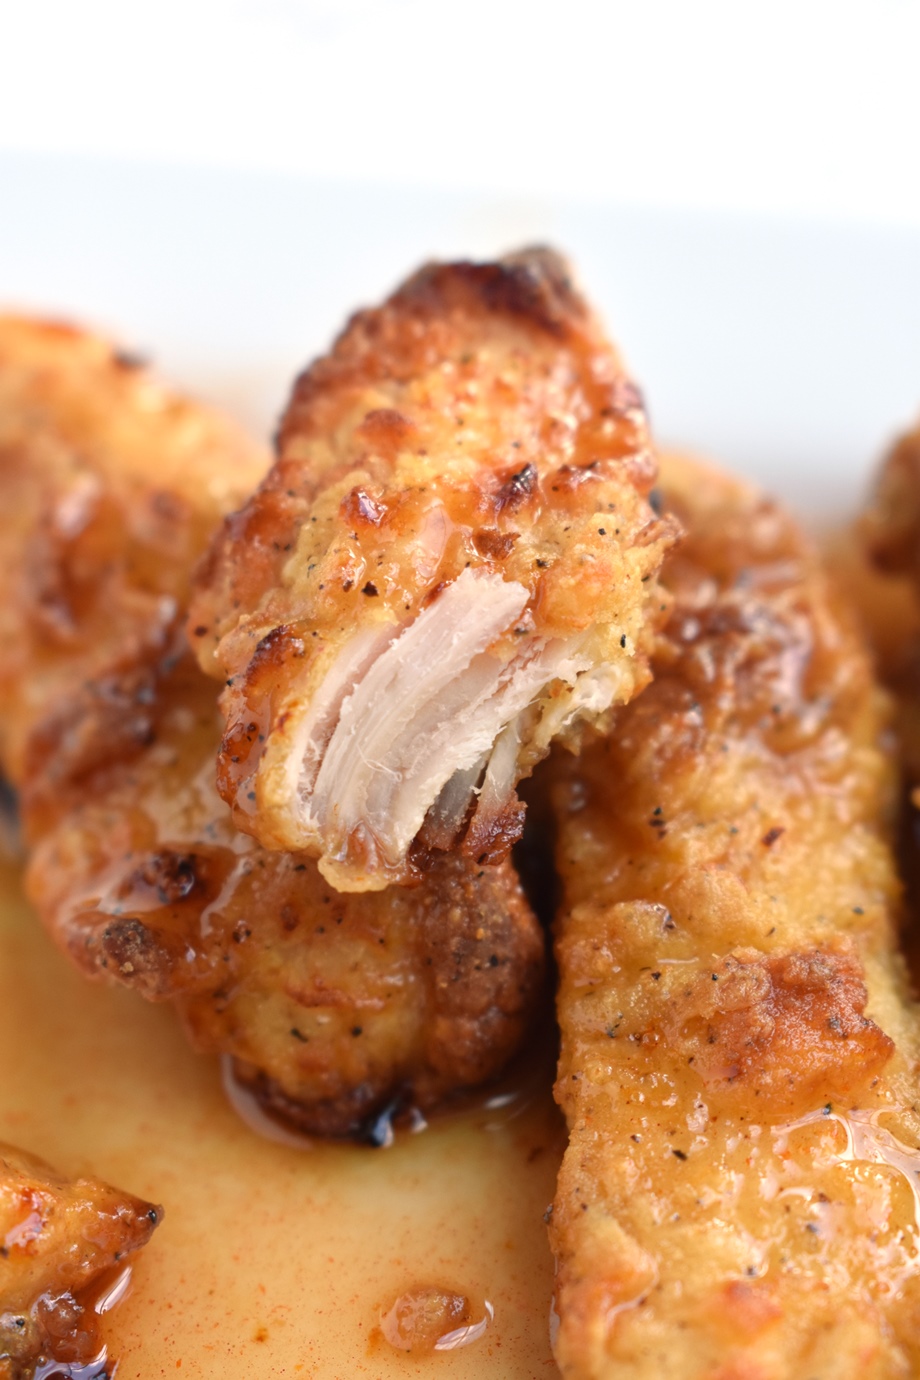 Crispy Baked Hot Honey Chicken features super crispy baked chicken strips covered in a spicy honey sauce that everyone will love! Makes a perfect appetizer or meal.